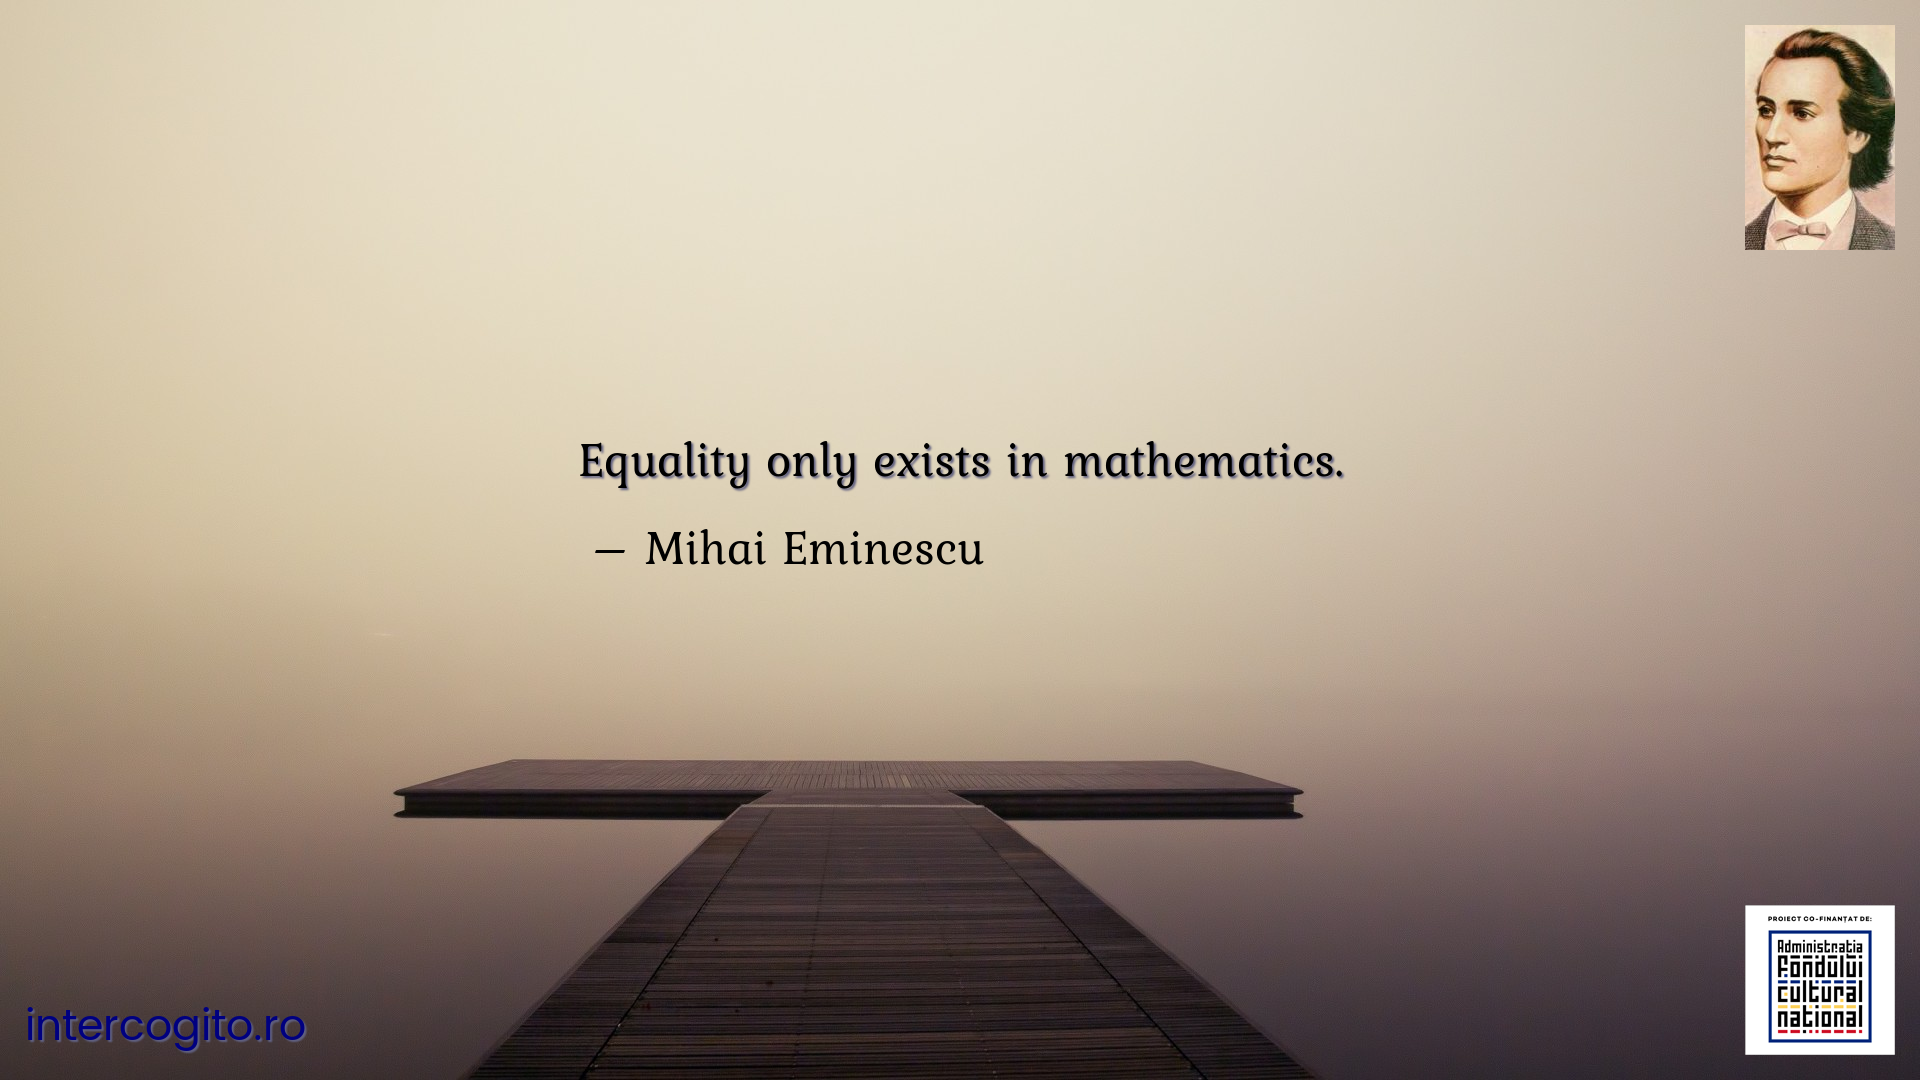 Equality only exists in mathematics.